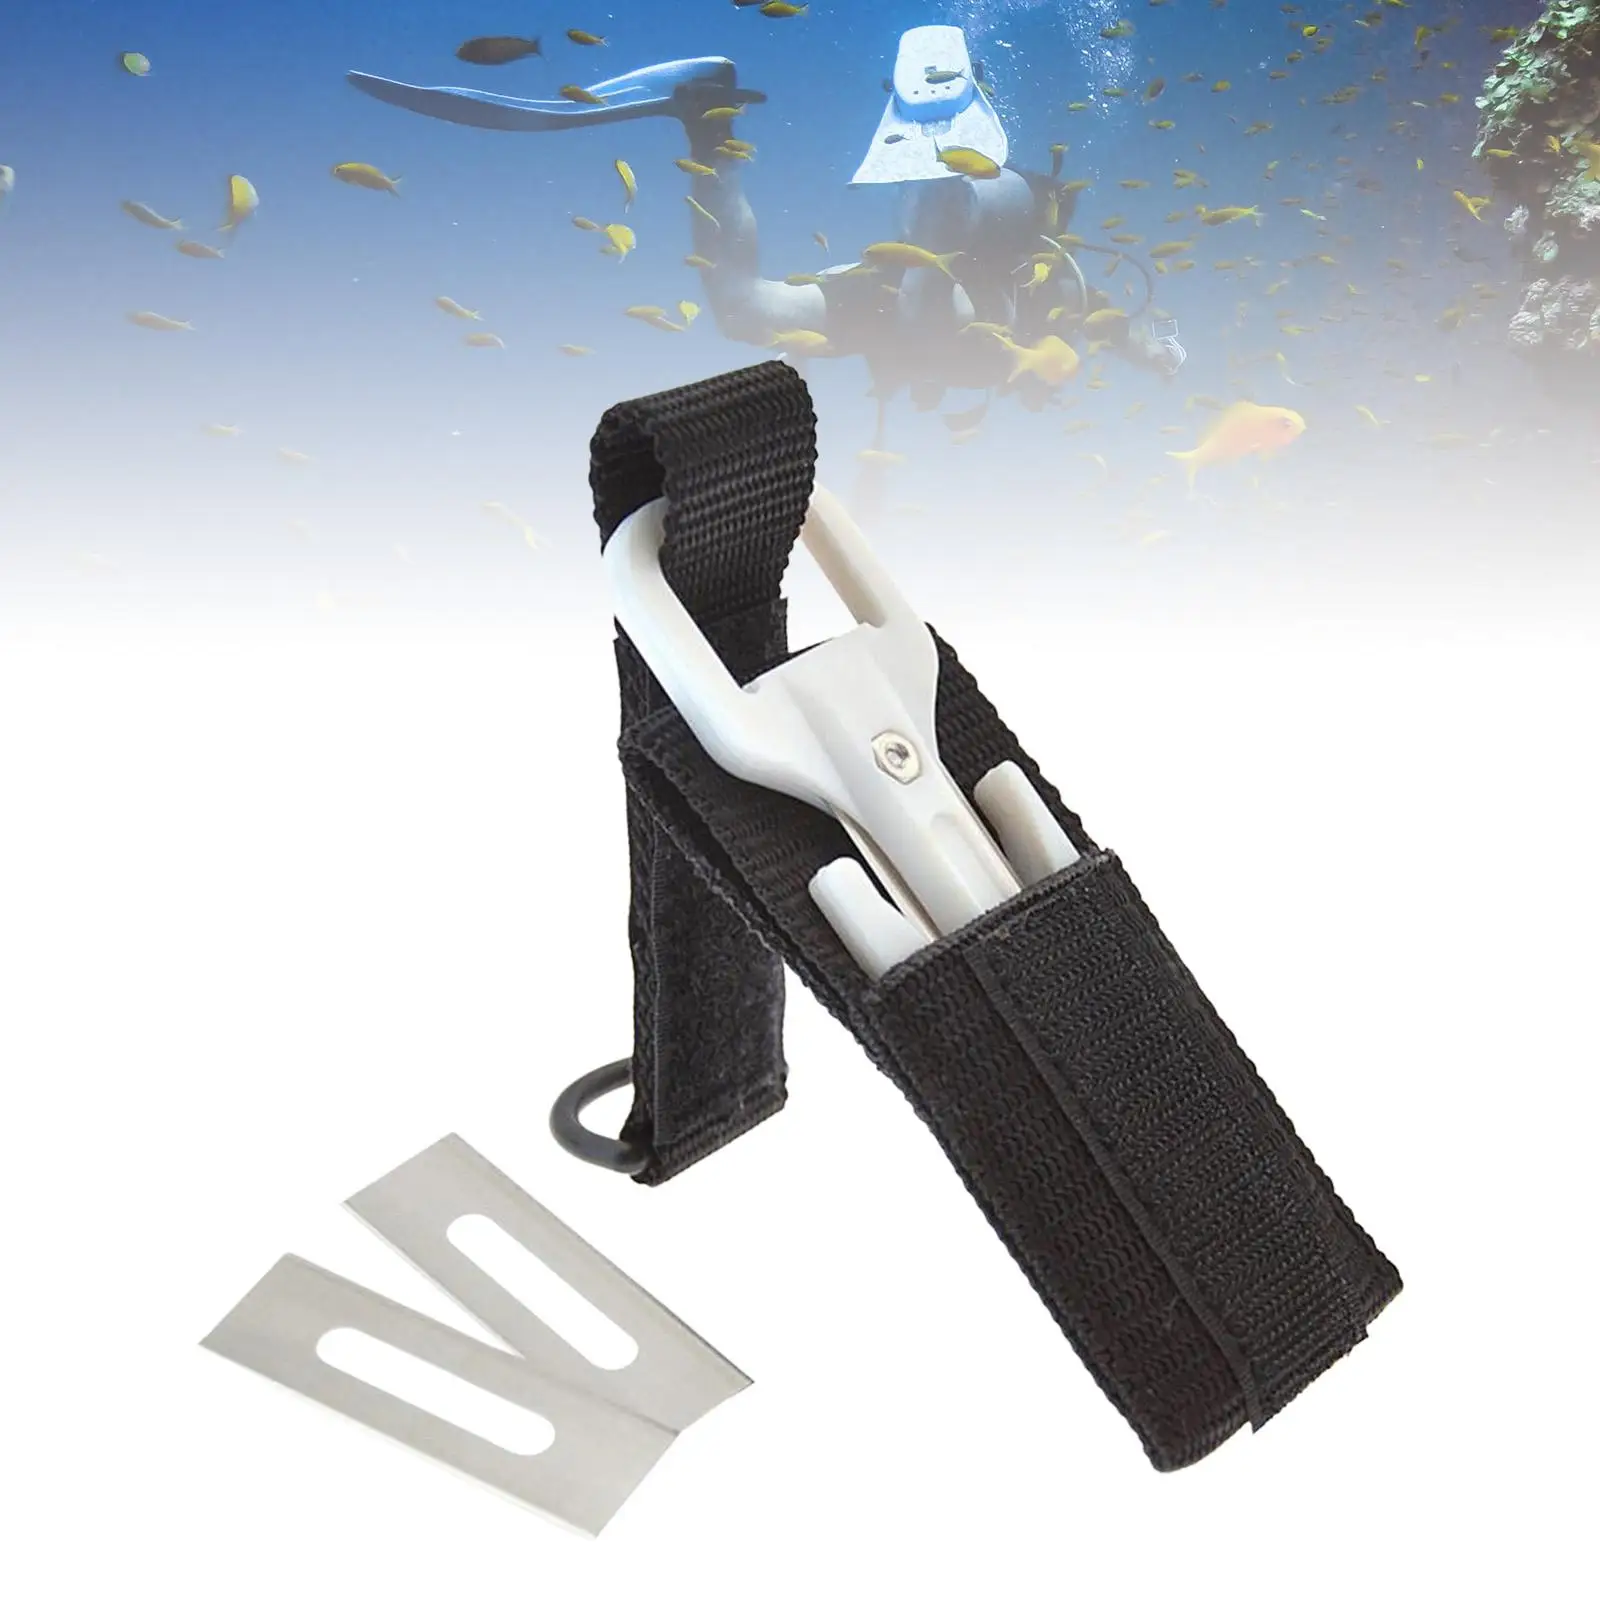 Snorkeling Knives with Extra Blades Safety Scuba Dive Line Cutter for Freediving Spearfishing Diving Fishing Line 